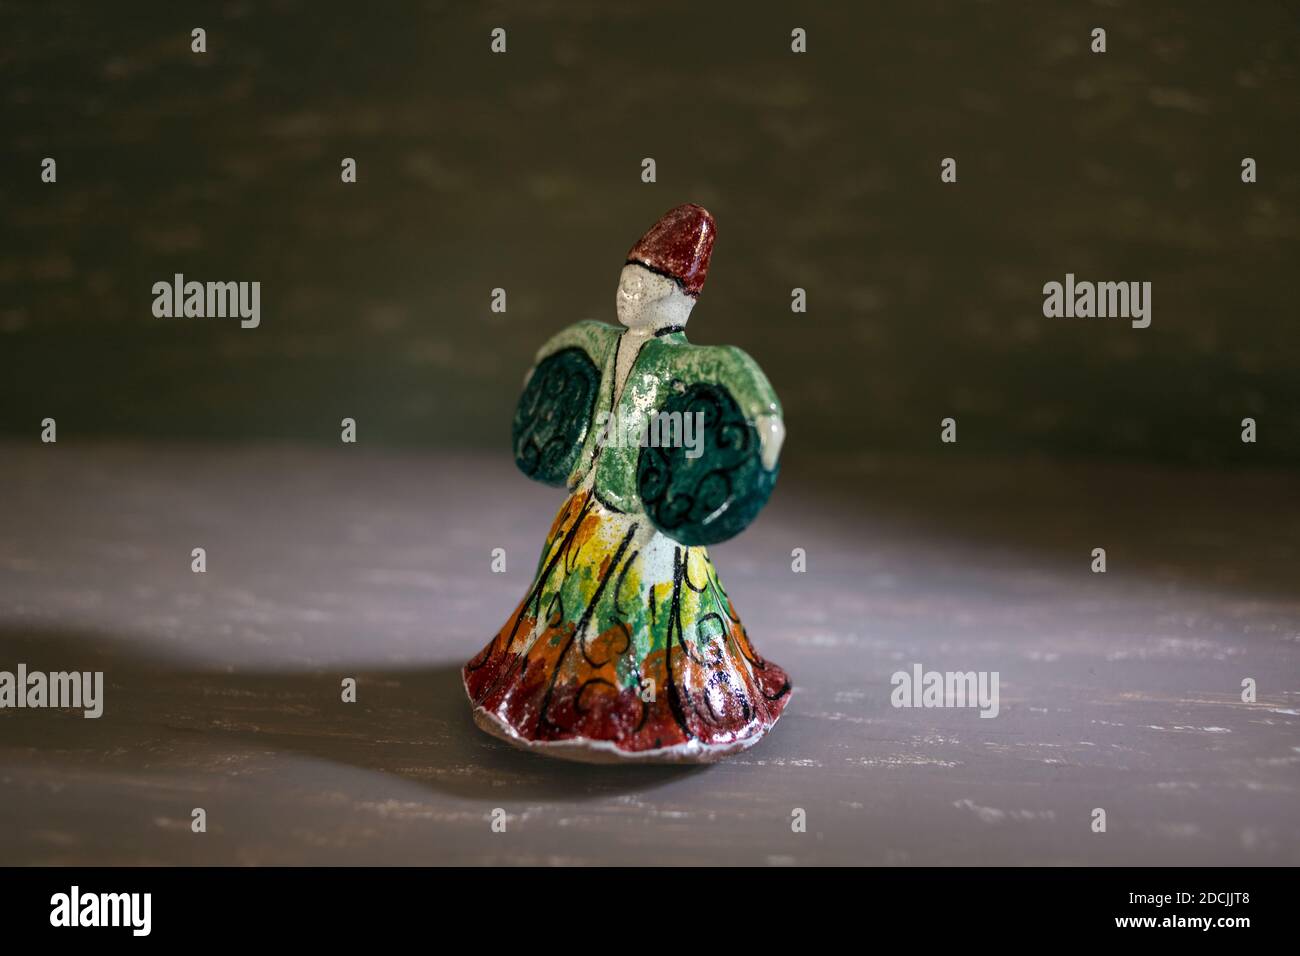 Cairo, November 10. traditional   handmade pottery statue of dancing dervish (a member of a Muslim (specifically Sufi) religious order) with colorful Stock Photo